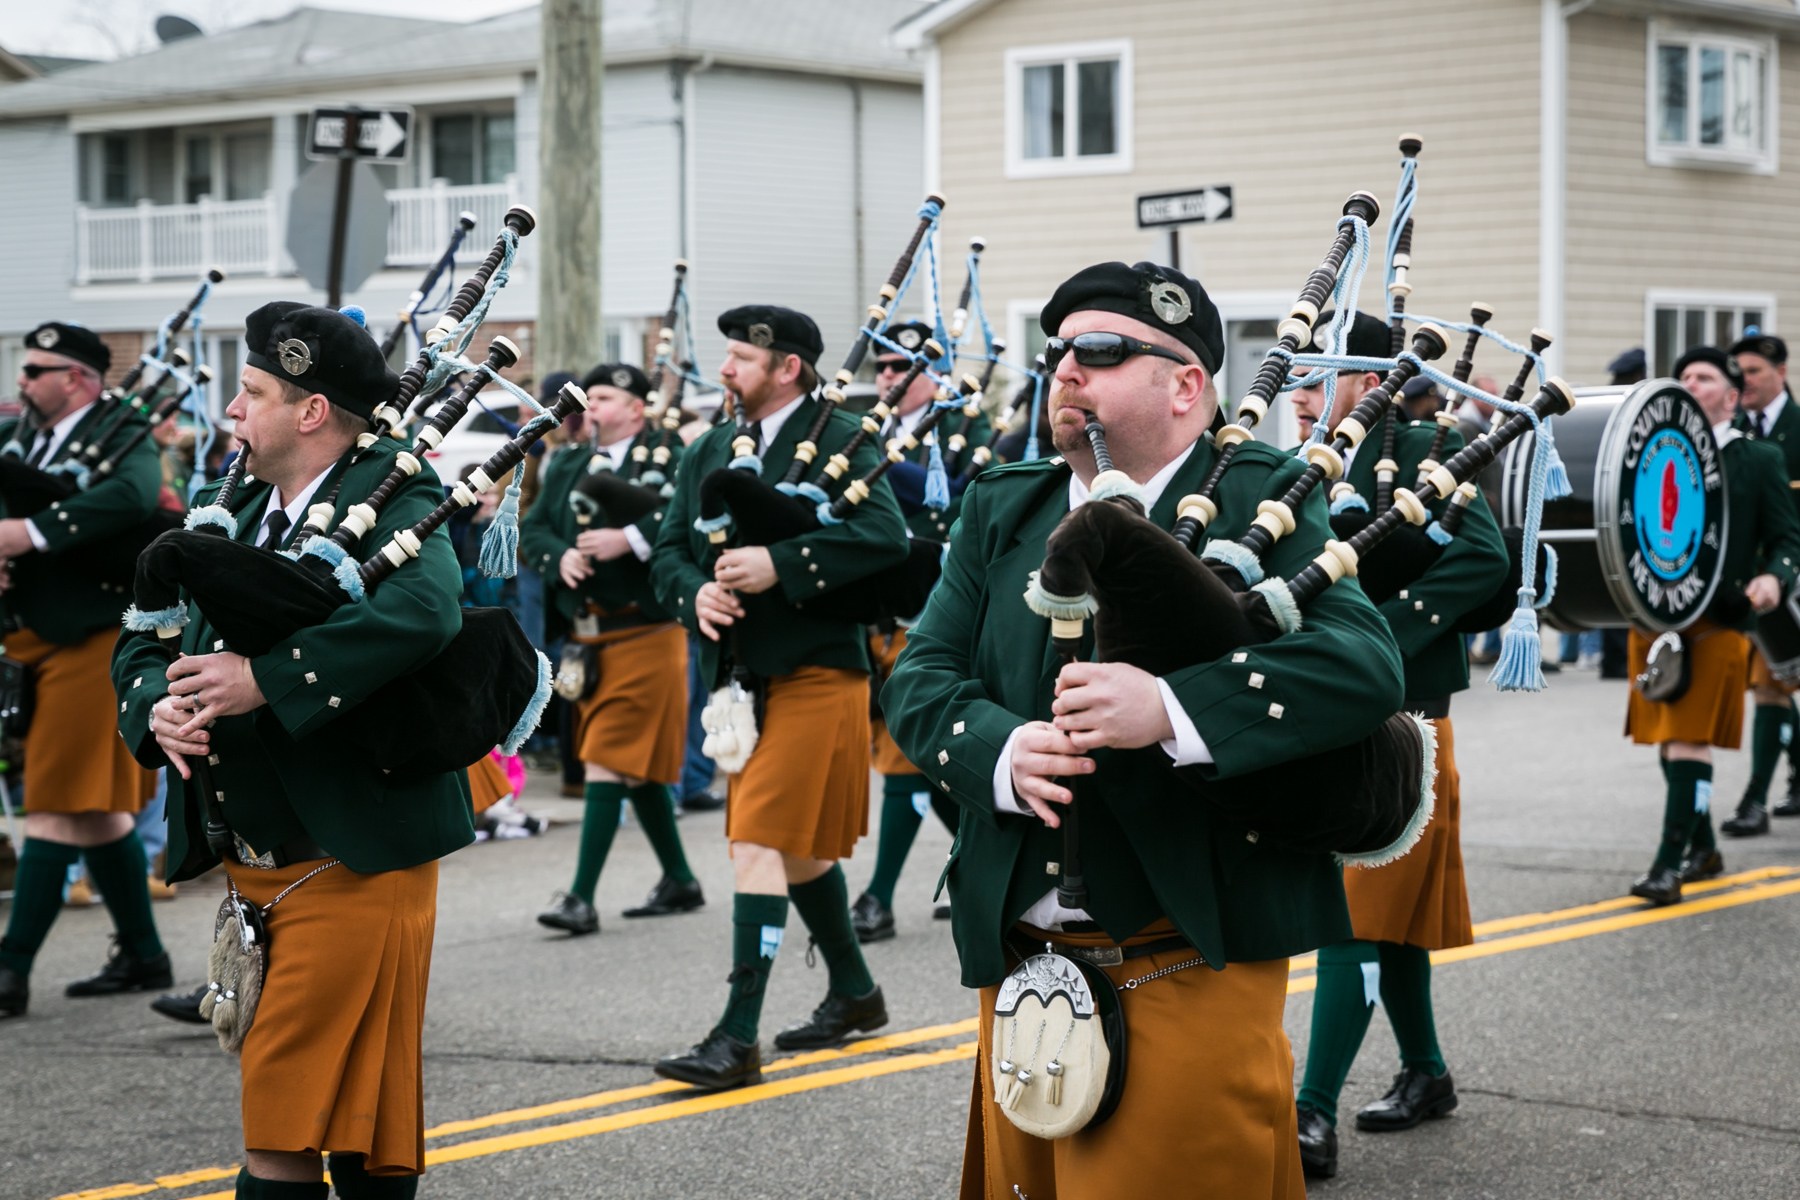 Queen County St Patrick's Day Parade